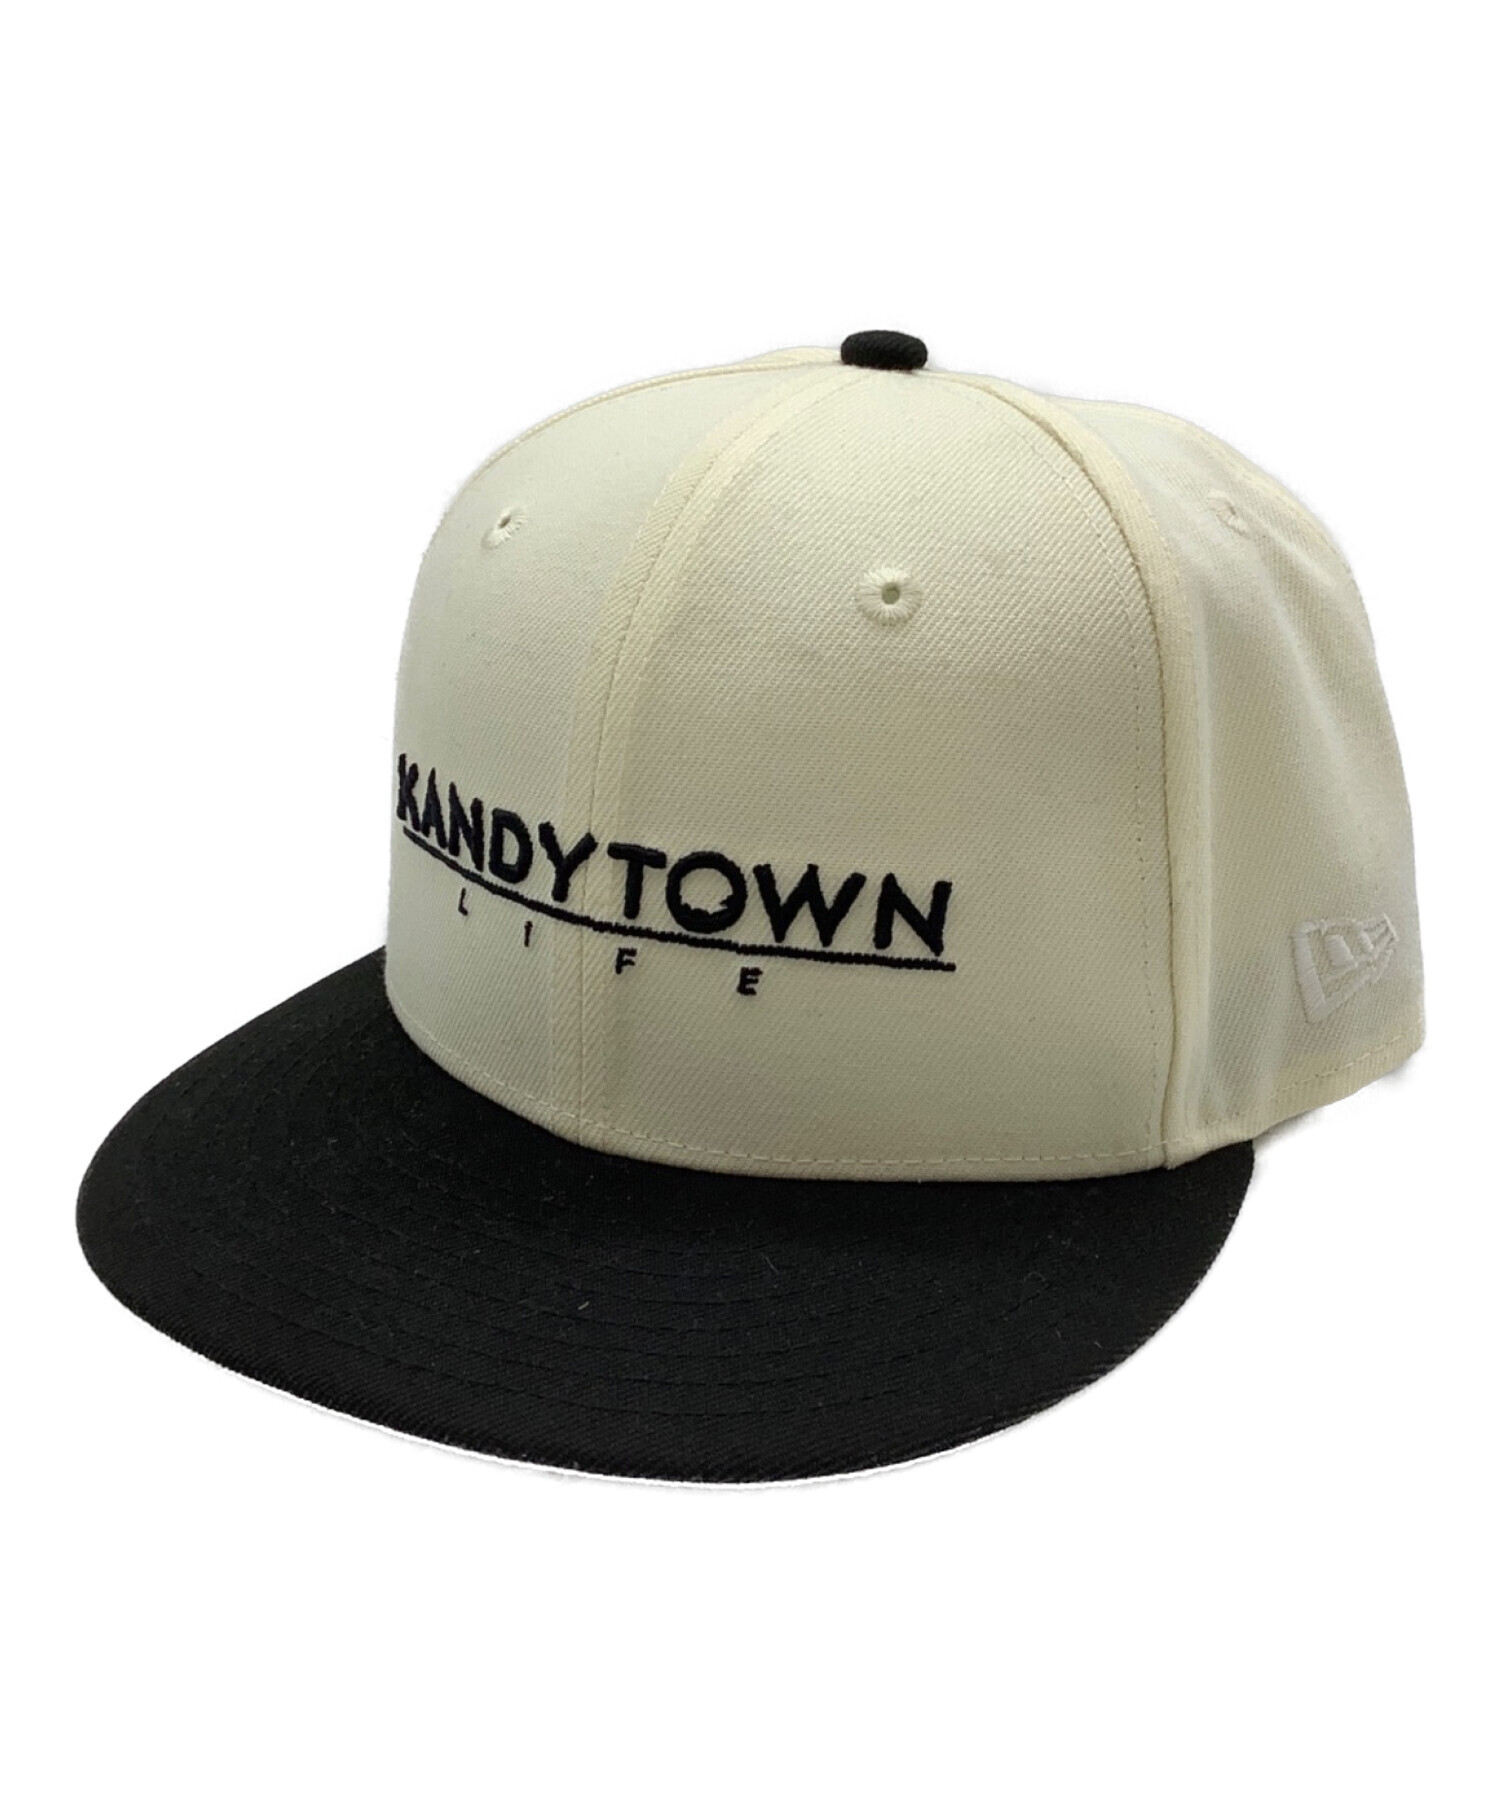 KANDY TOWN キャップ　新品未使用